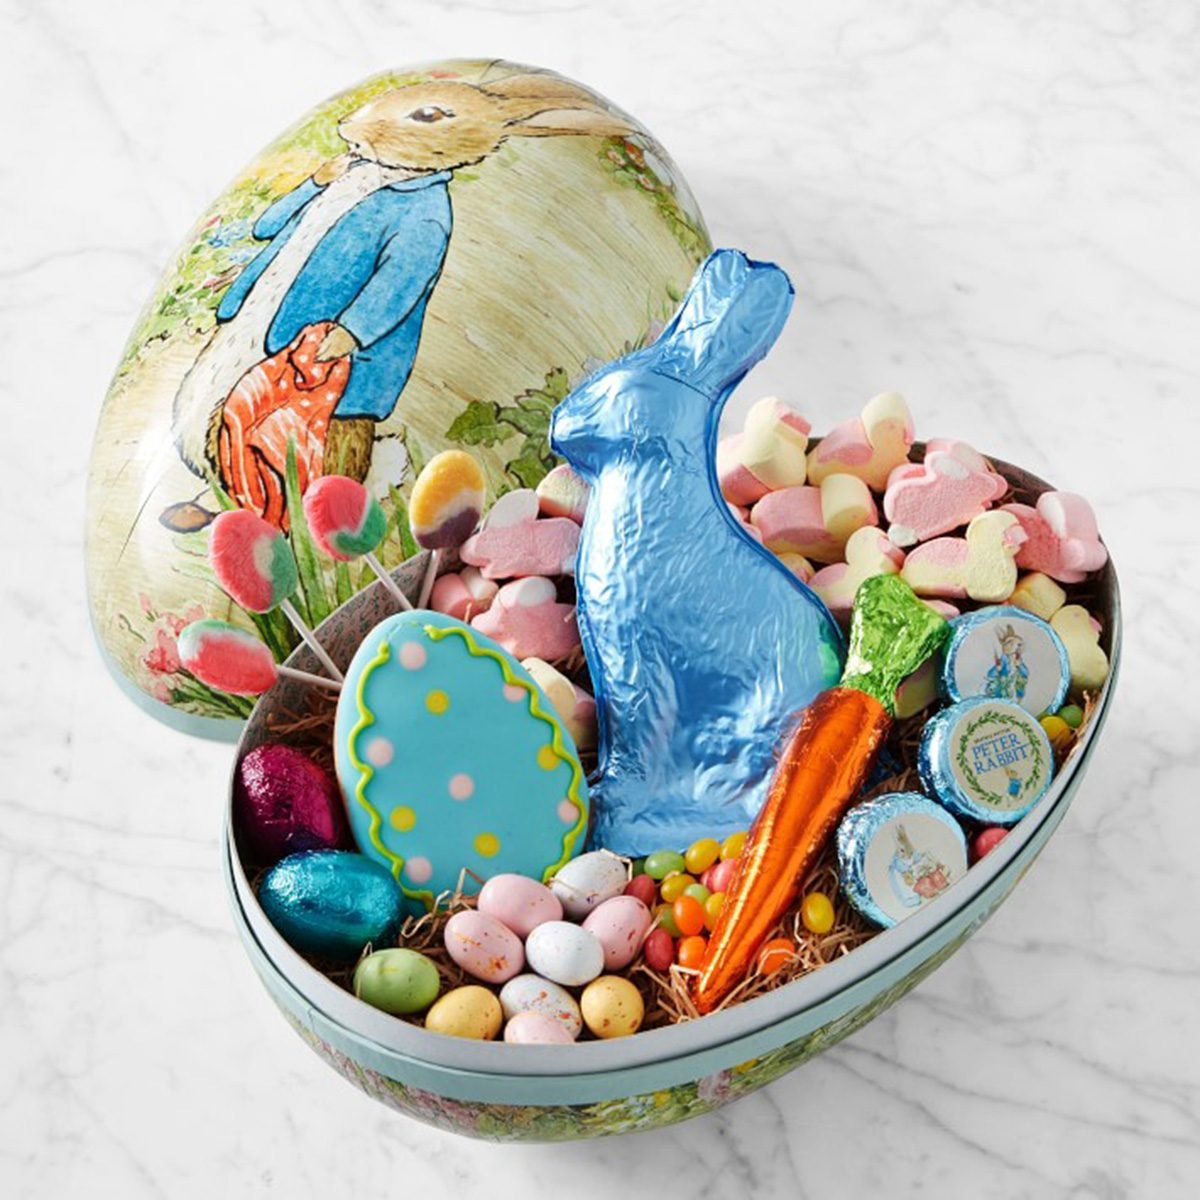 14 Vintage Easter Decorations That Will Take You Back to Grandma's